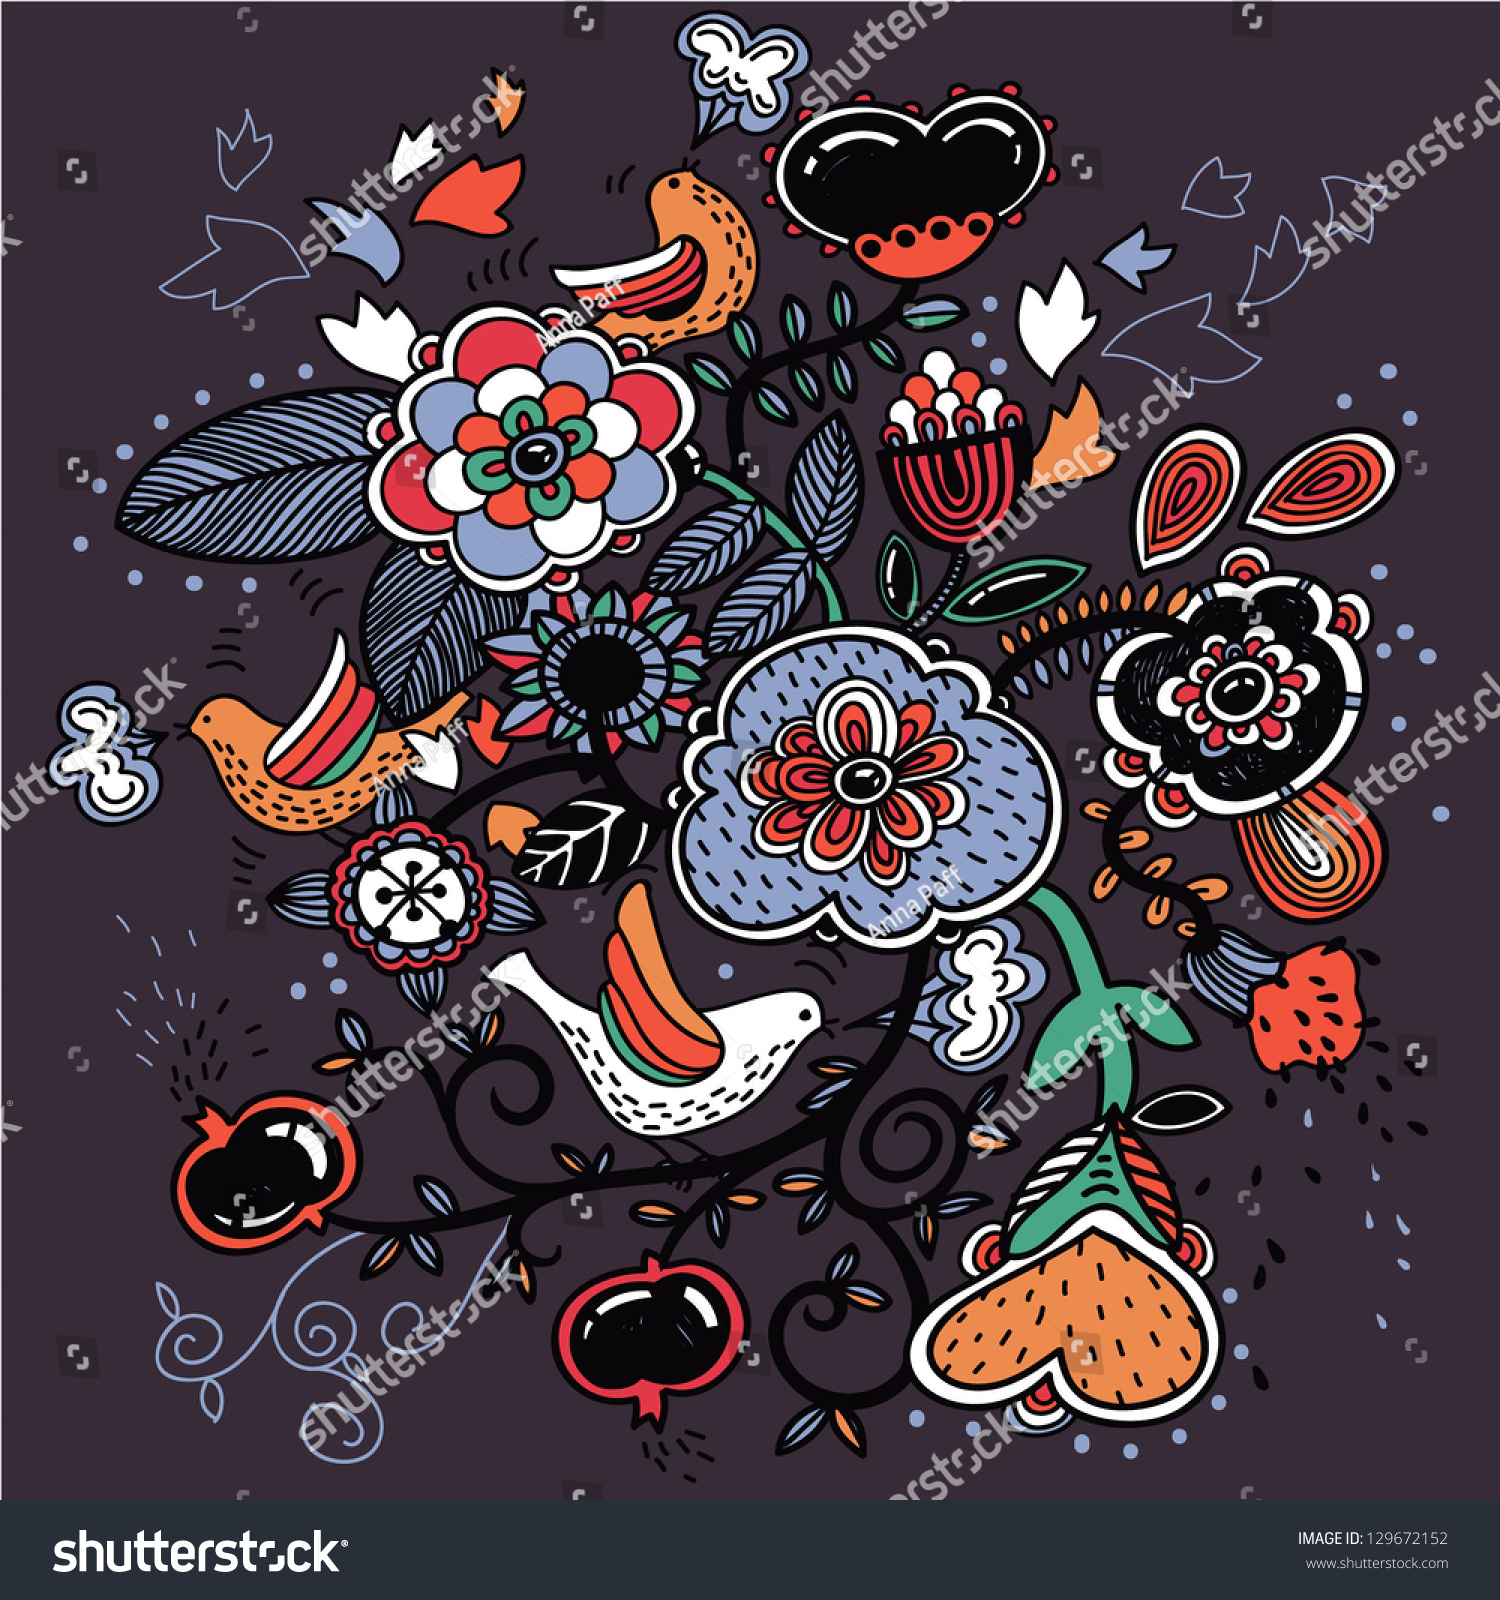 Vector Floral Illustration With Colorful Fantasy Plants And Birds On A